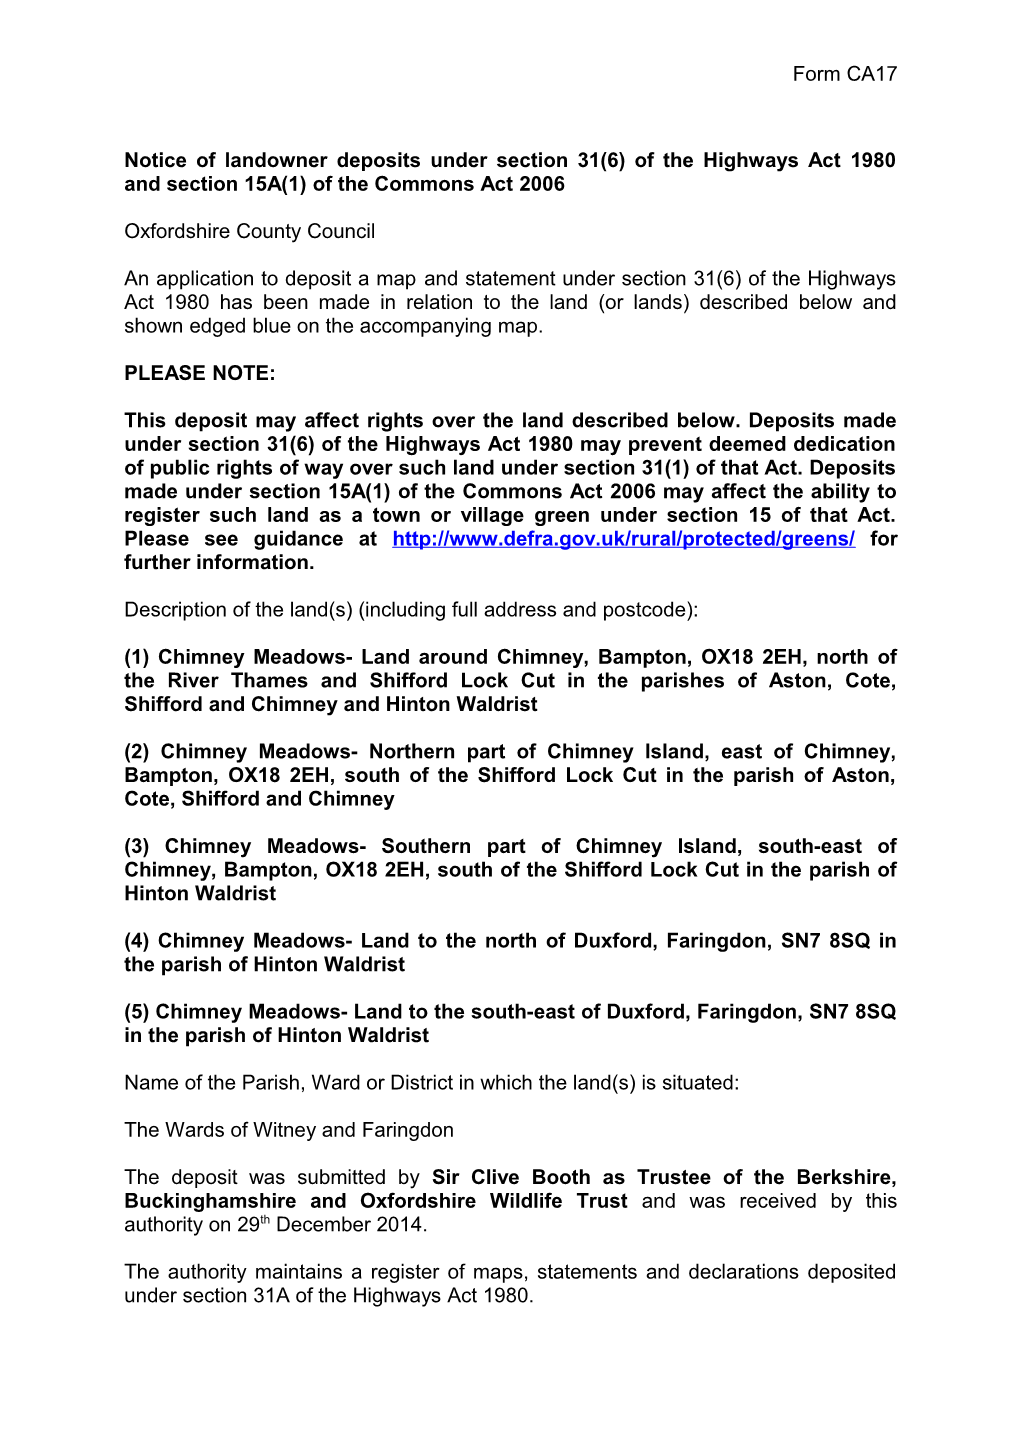 Notice of Landowner Deposits Under Section 31(6) of the Highways Act 1980 and Section